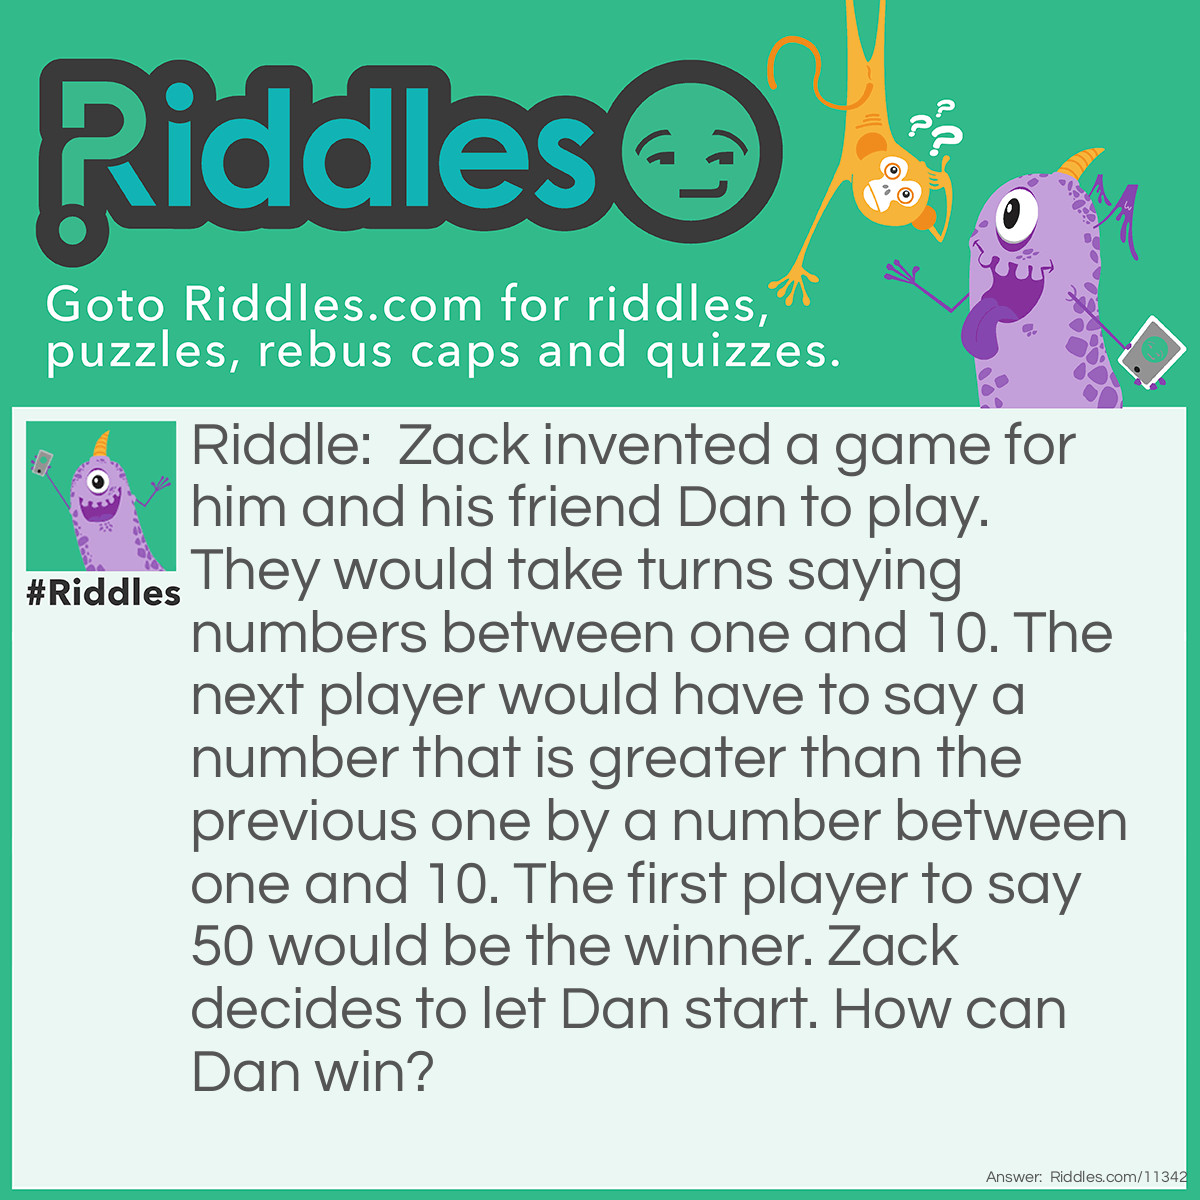 Riddle: Zack invented a game for him and his friend Dan to play. They would take turns saying numbers between one and 10. The next player would have to say a number that is greater than the previous one by a number between one and 10. The first player to say 50 would be the winner. Zack decides to let Dan start. How can Dan win? Answer: If Dan wants to say 50, then he needs Zack to say a number between 40 and 49, so right before 50, Dan needs to say 39. If he wants to say 39, then Zack needs to say a number between 29 and 38, so right before 39, Dan needs to say 28. If Dan wants to say 28, Zack has to say a number between 18 and 27, so right before 28, Dan has to say 17. And if he wants to say 17, he has to let Zack say a number between 7 and 16, so right before 17, Dan has to say 6. In order to win, Dan needs to say 6, then 17, then 28, then 39, and finally 50.